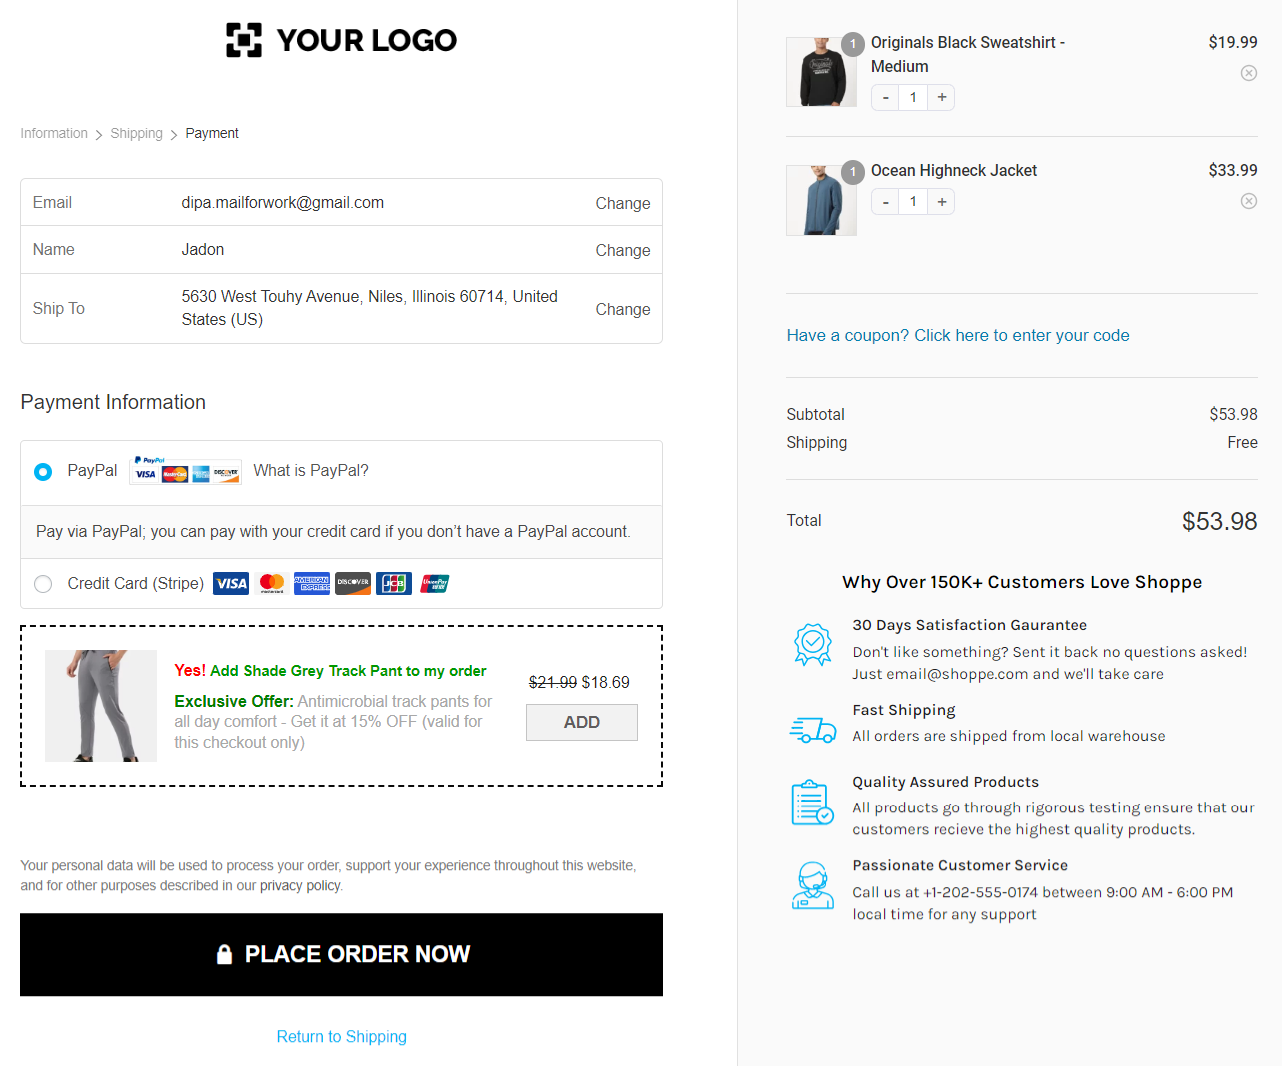 Take a look at this Shopify-style checkout page in WooCommerce built using FunnelKit Funnel Builder